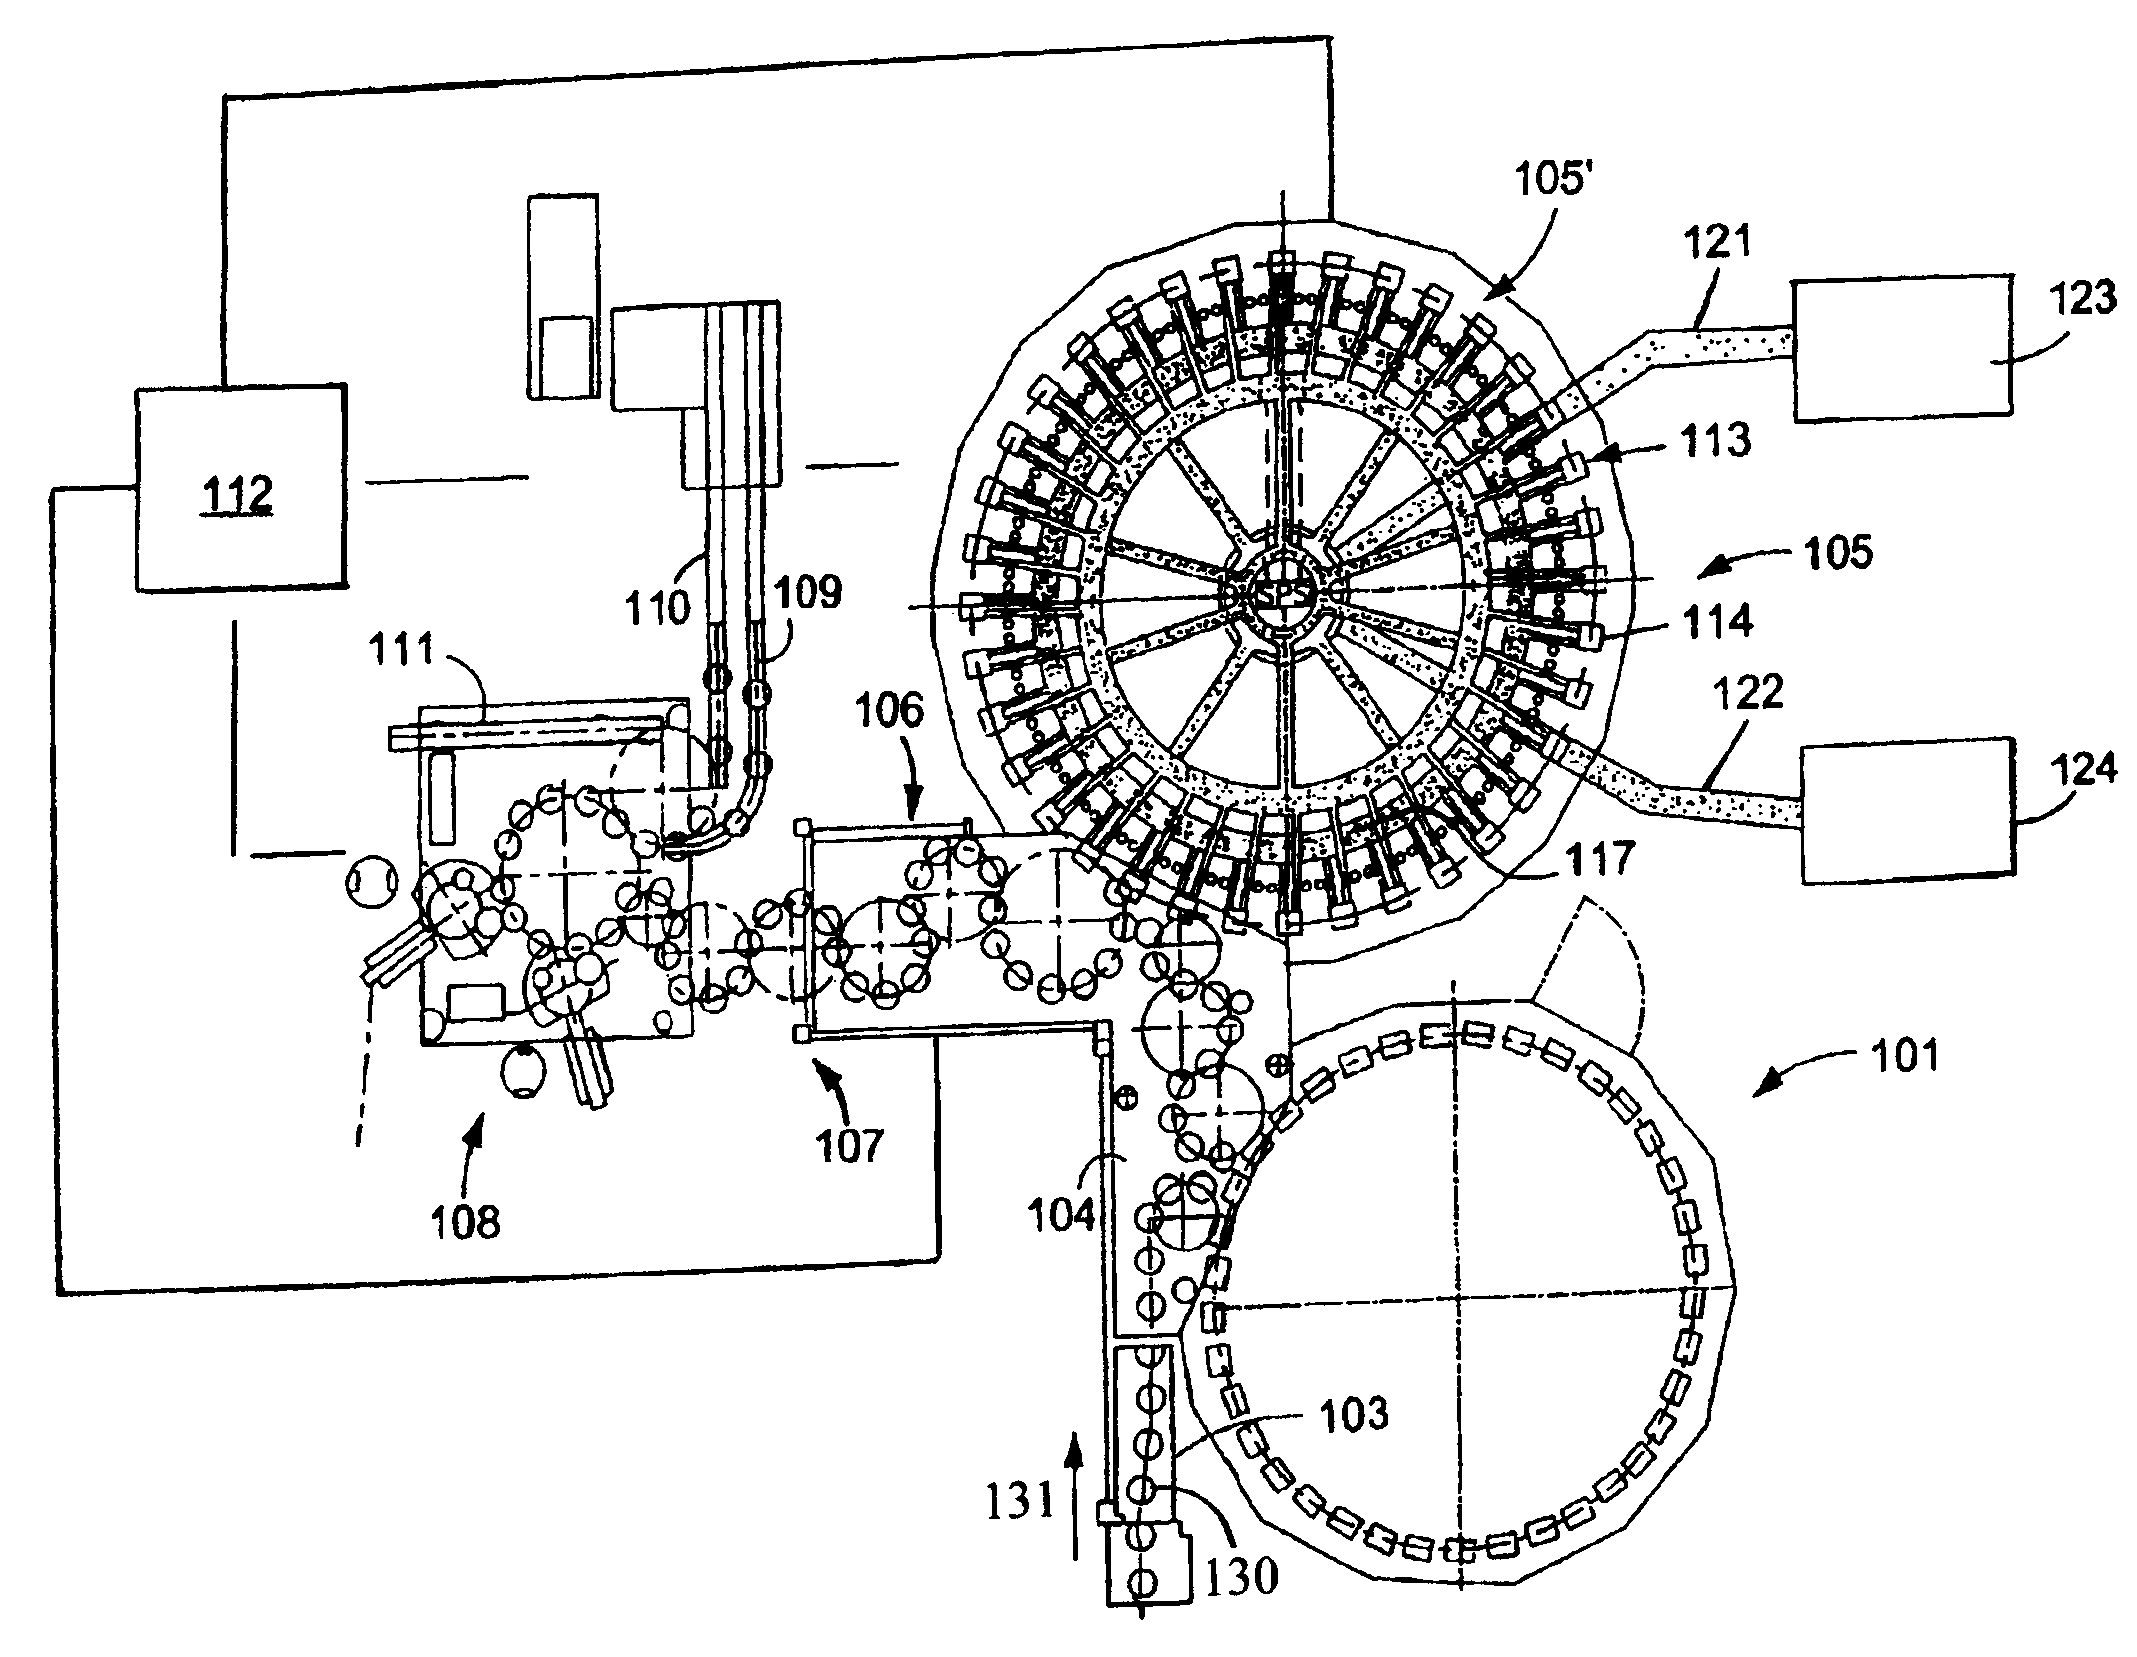 Beverage bottle filling plant with a beverage bottle labeling machine, and a cutting arrangement for a beverage bottle labeling machine